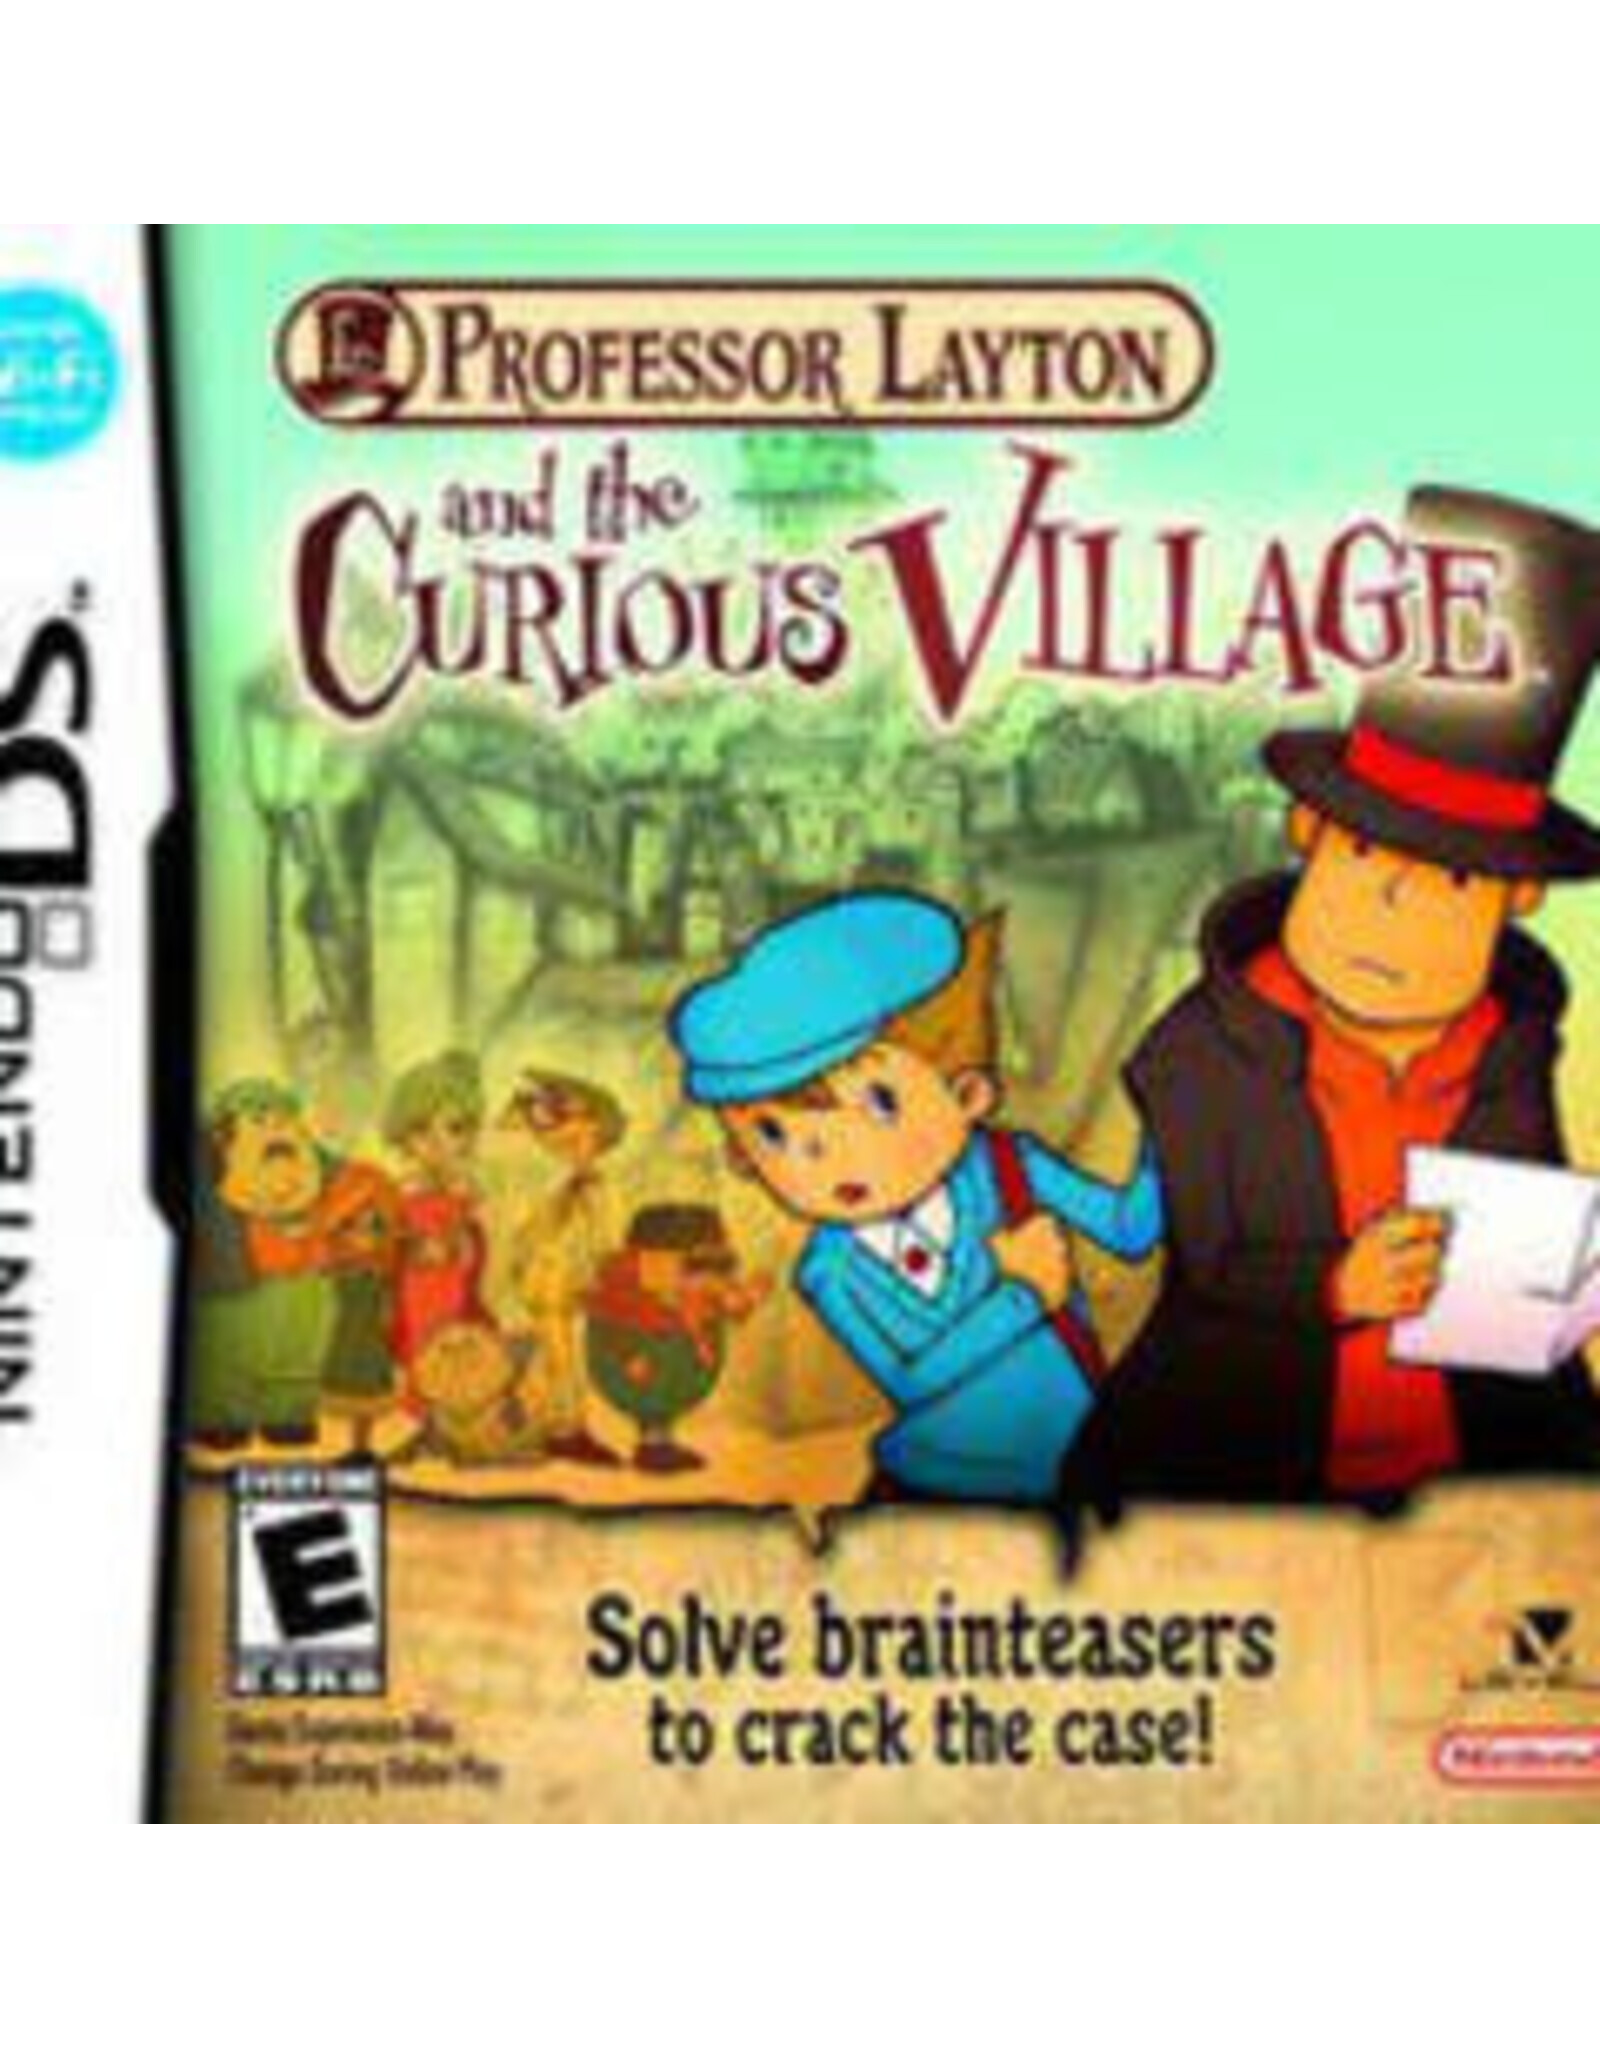 Nintendo DS Professor Layton and the Curious Village (Used, No Manual)